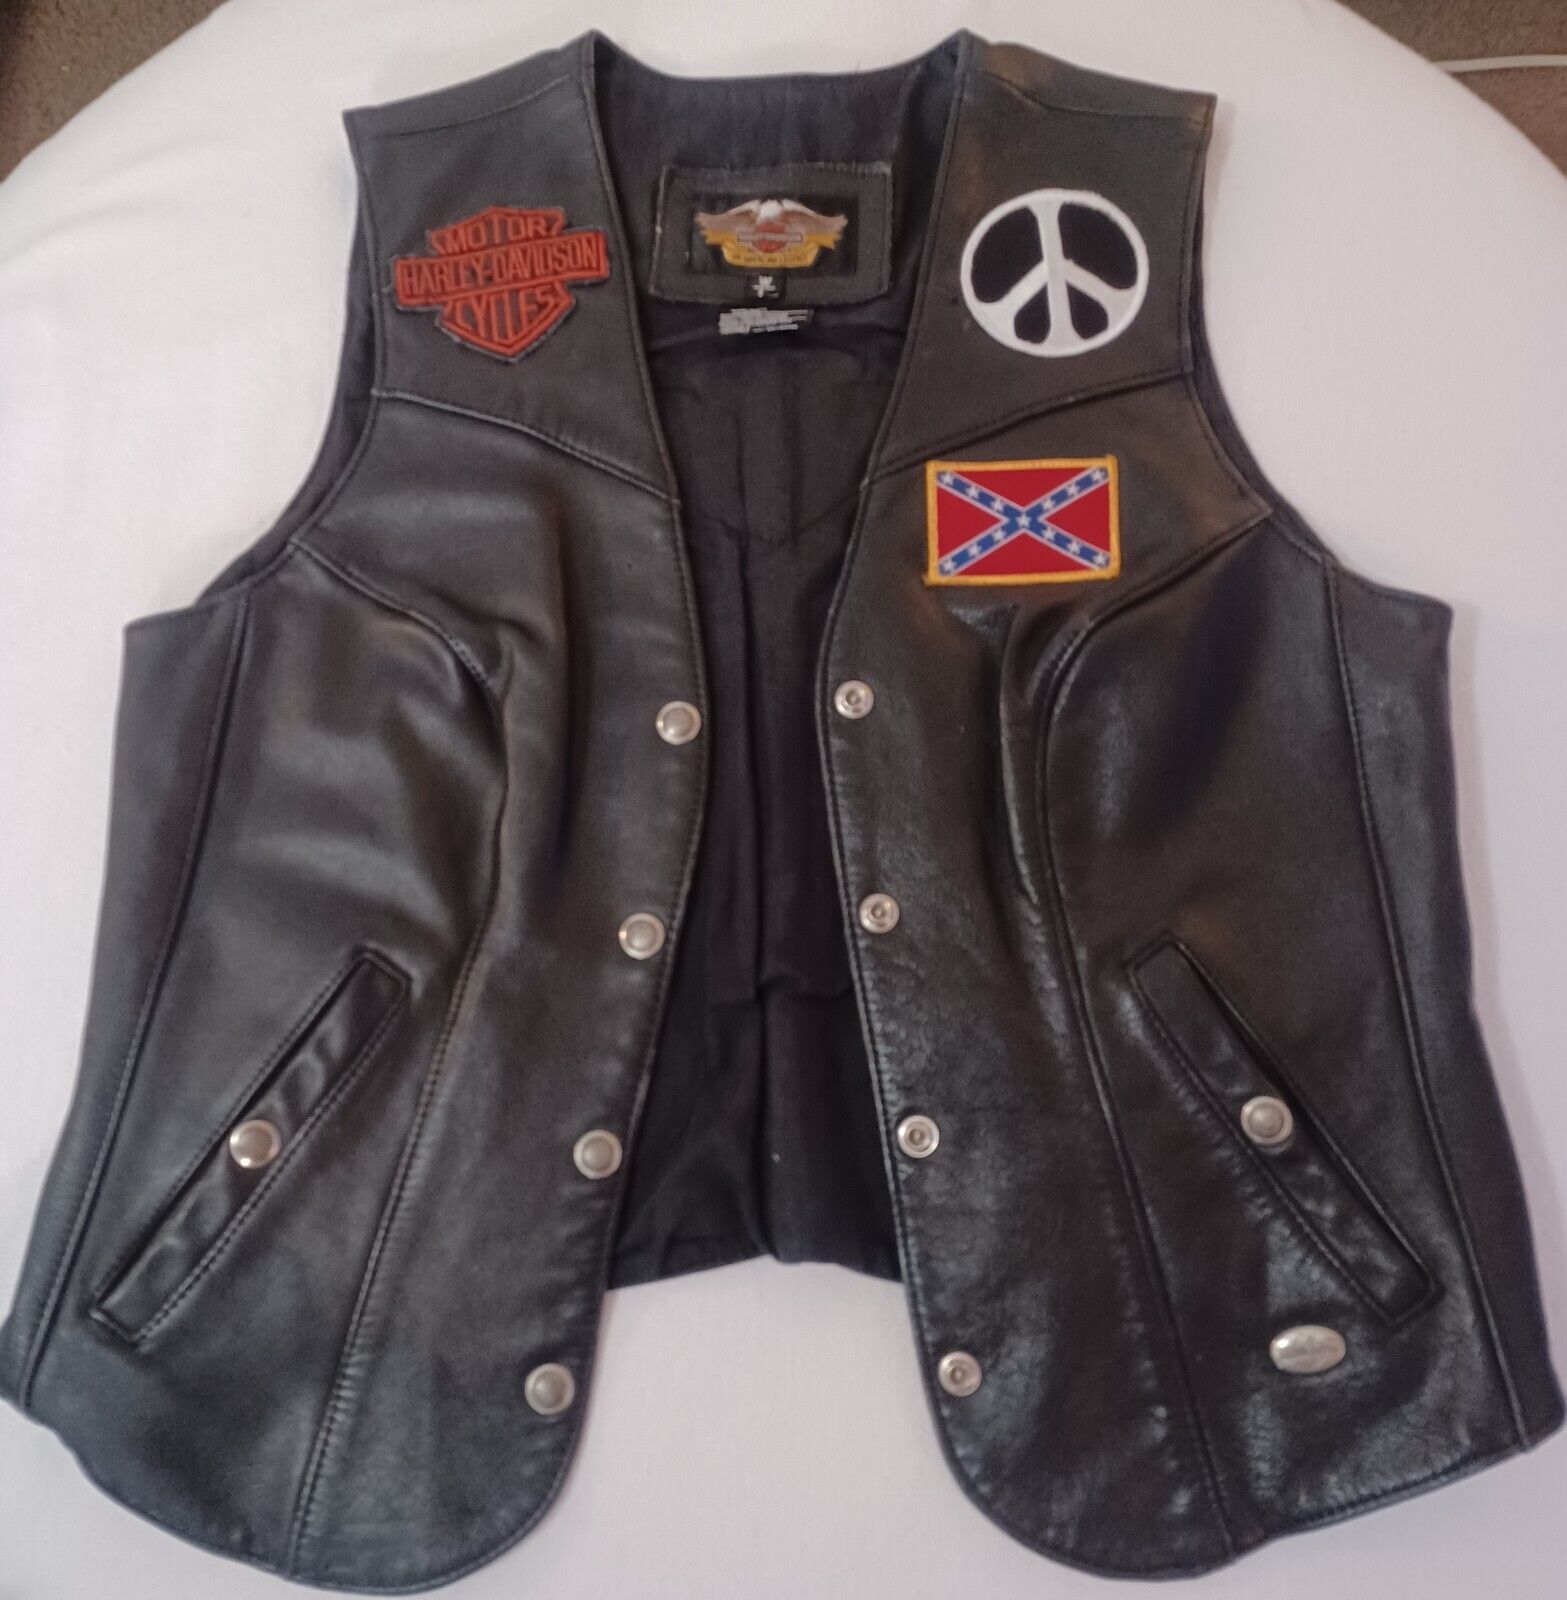 Harley Davidson Leather Vest With Patches Women's Size Large